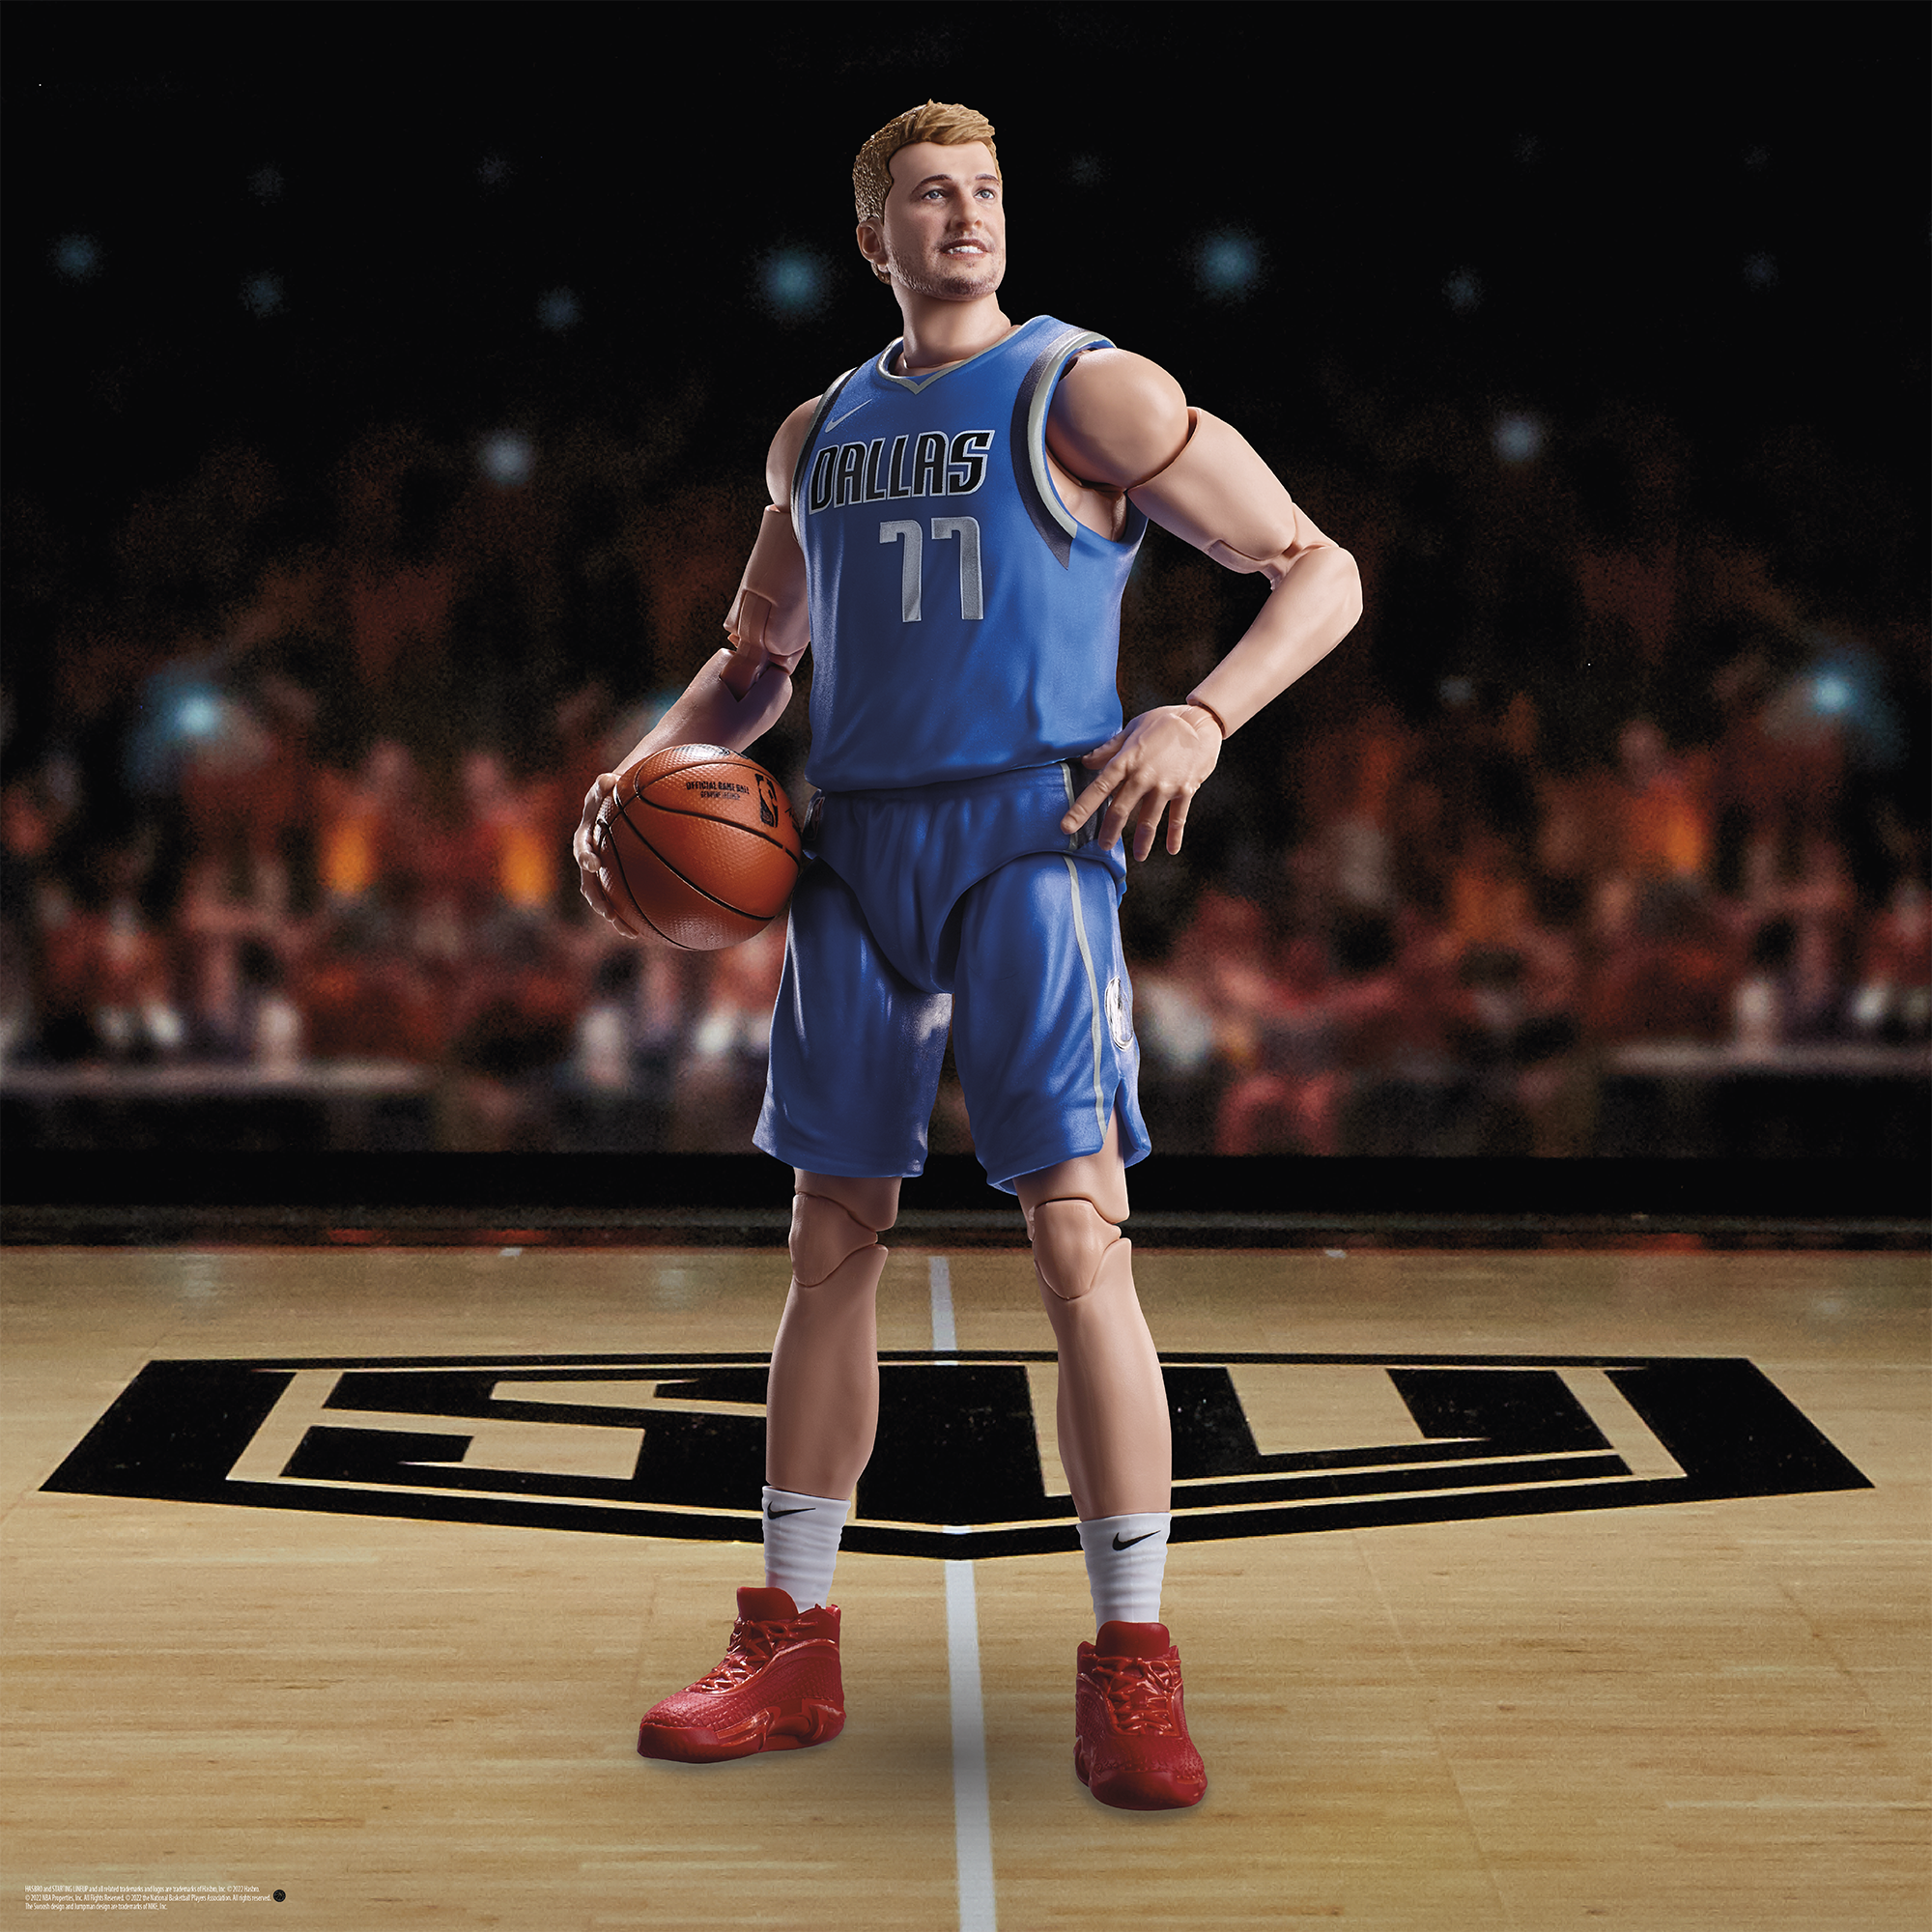 Hasbro Starting Lineup Luka Doncic figure up for pre-order